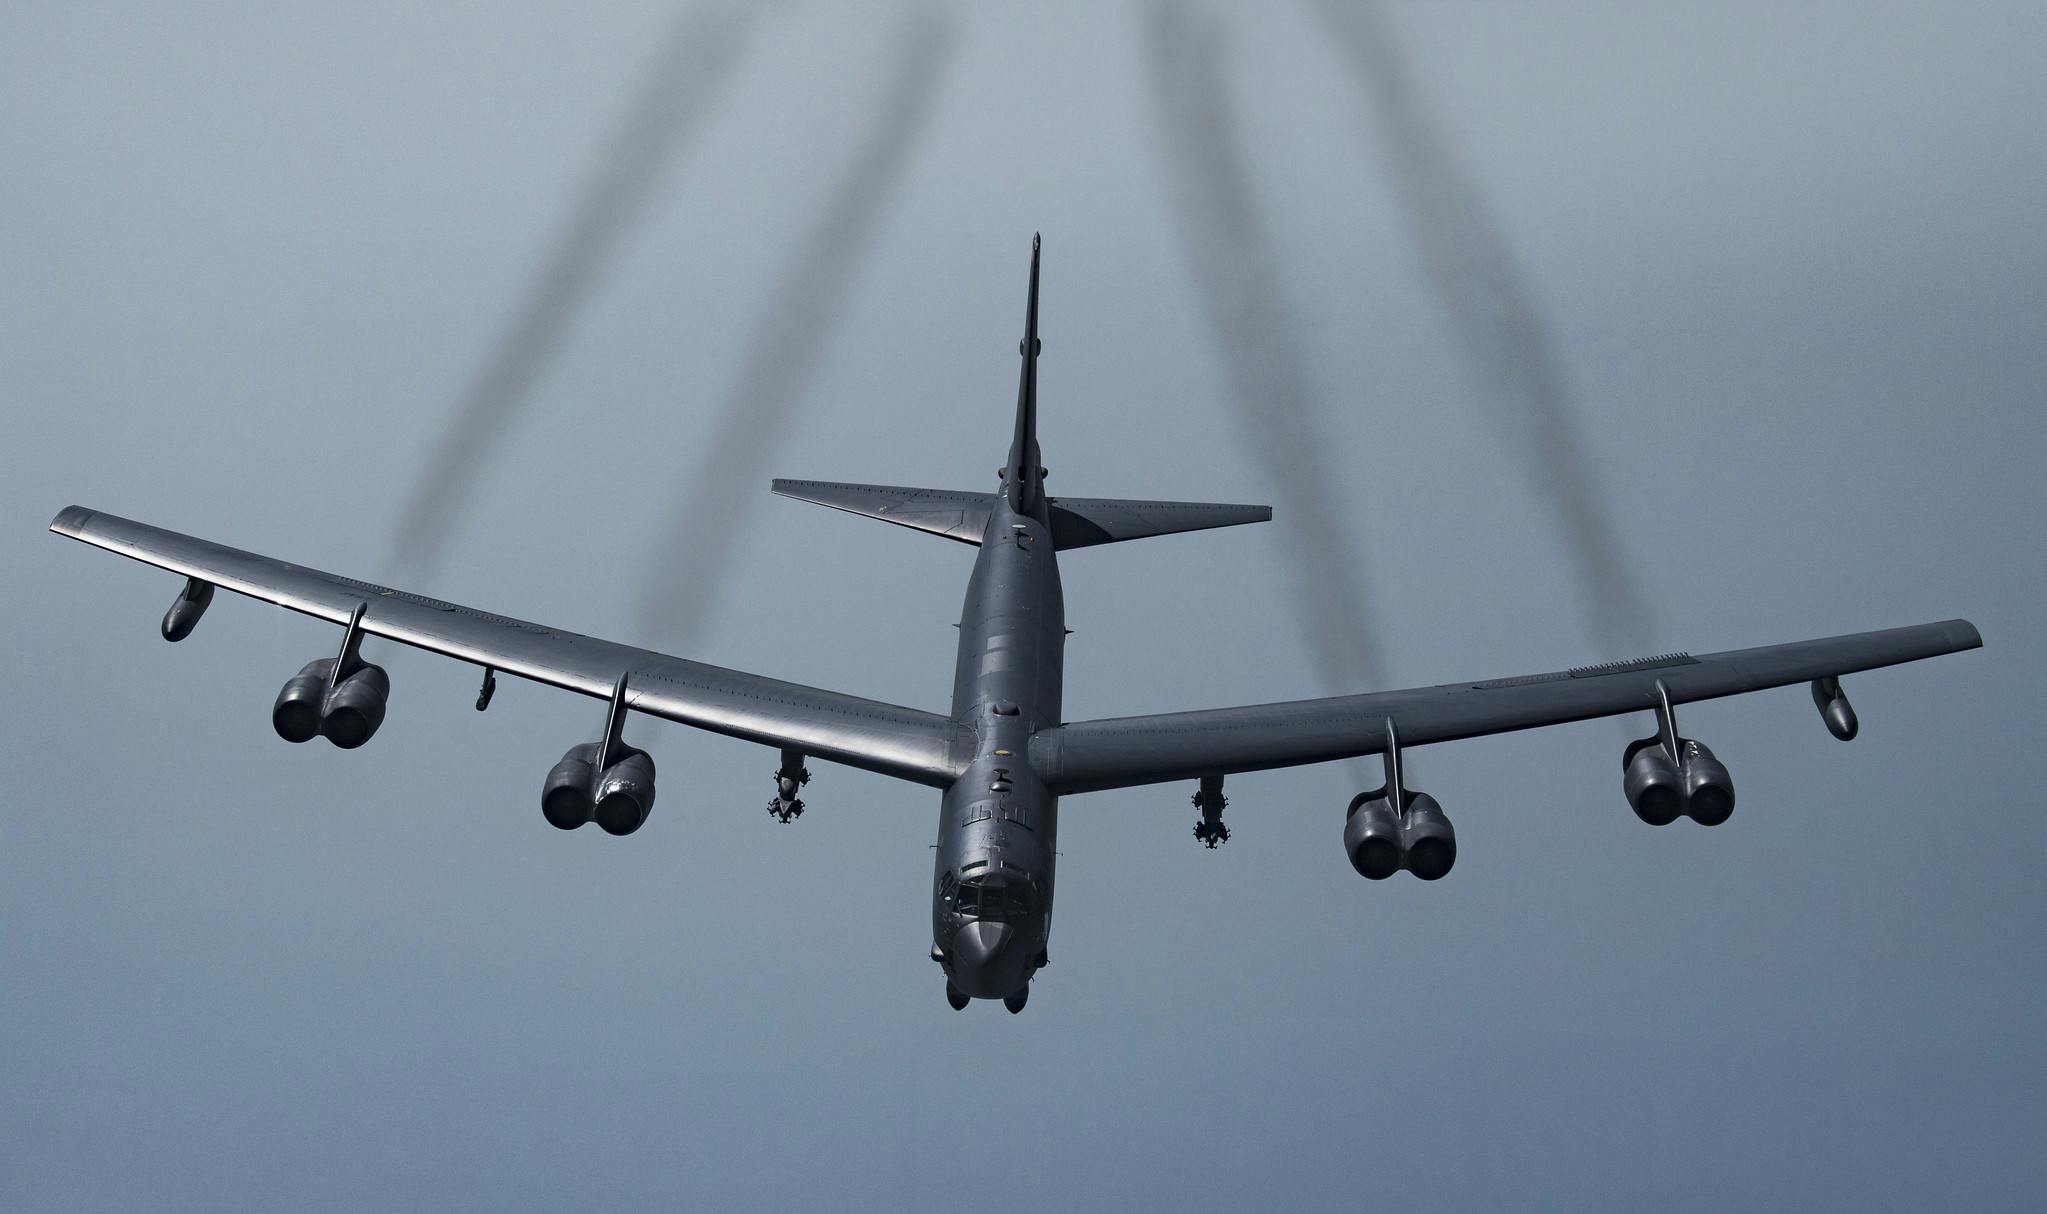 This bomber made the B-52 look puny